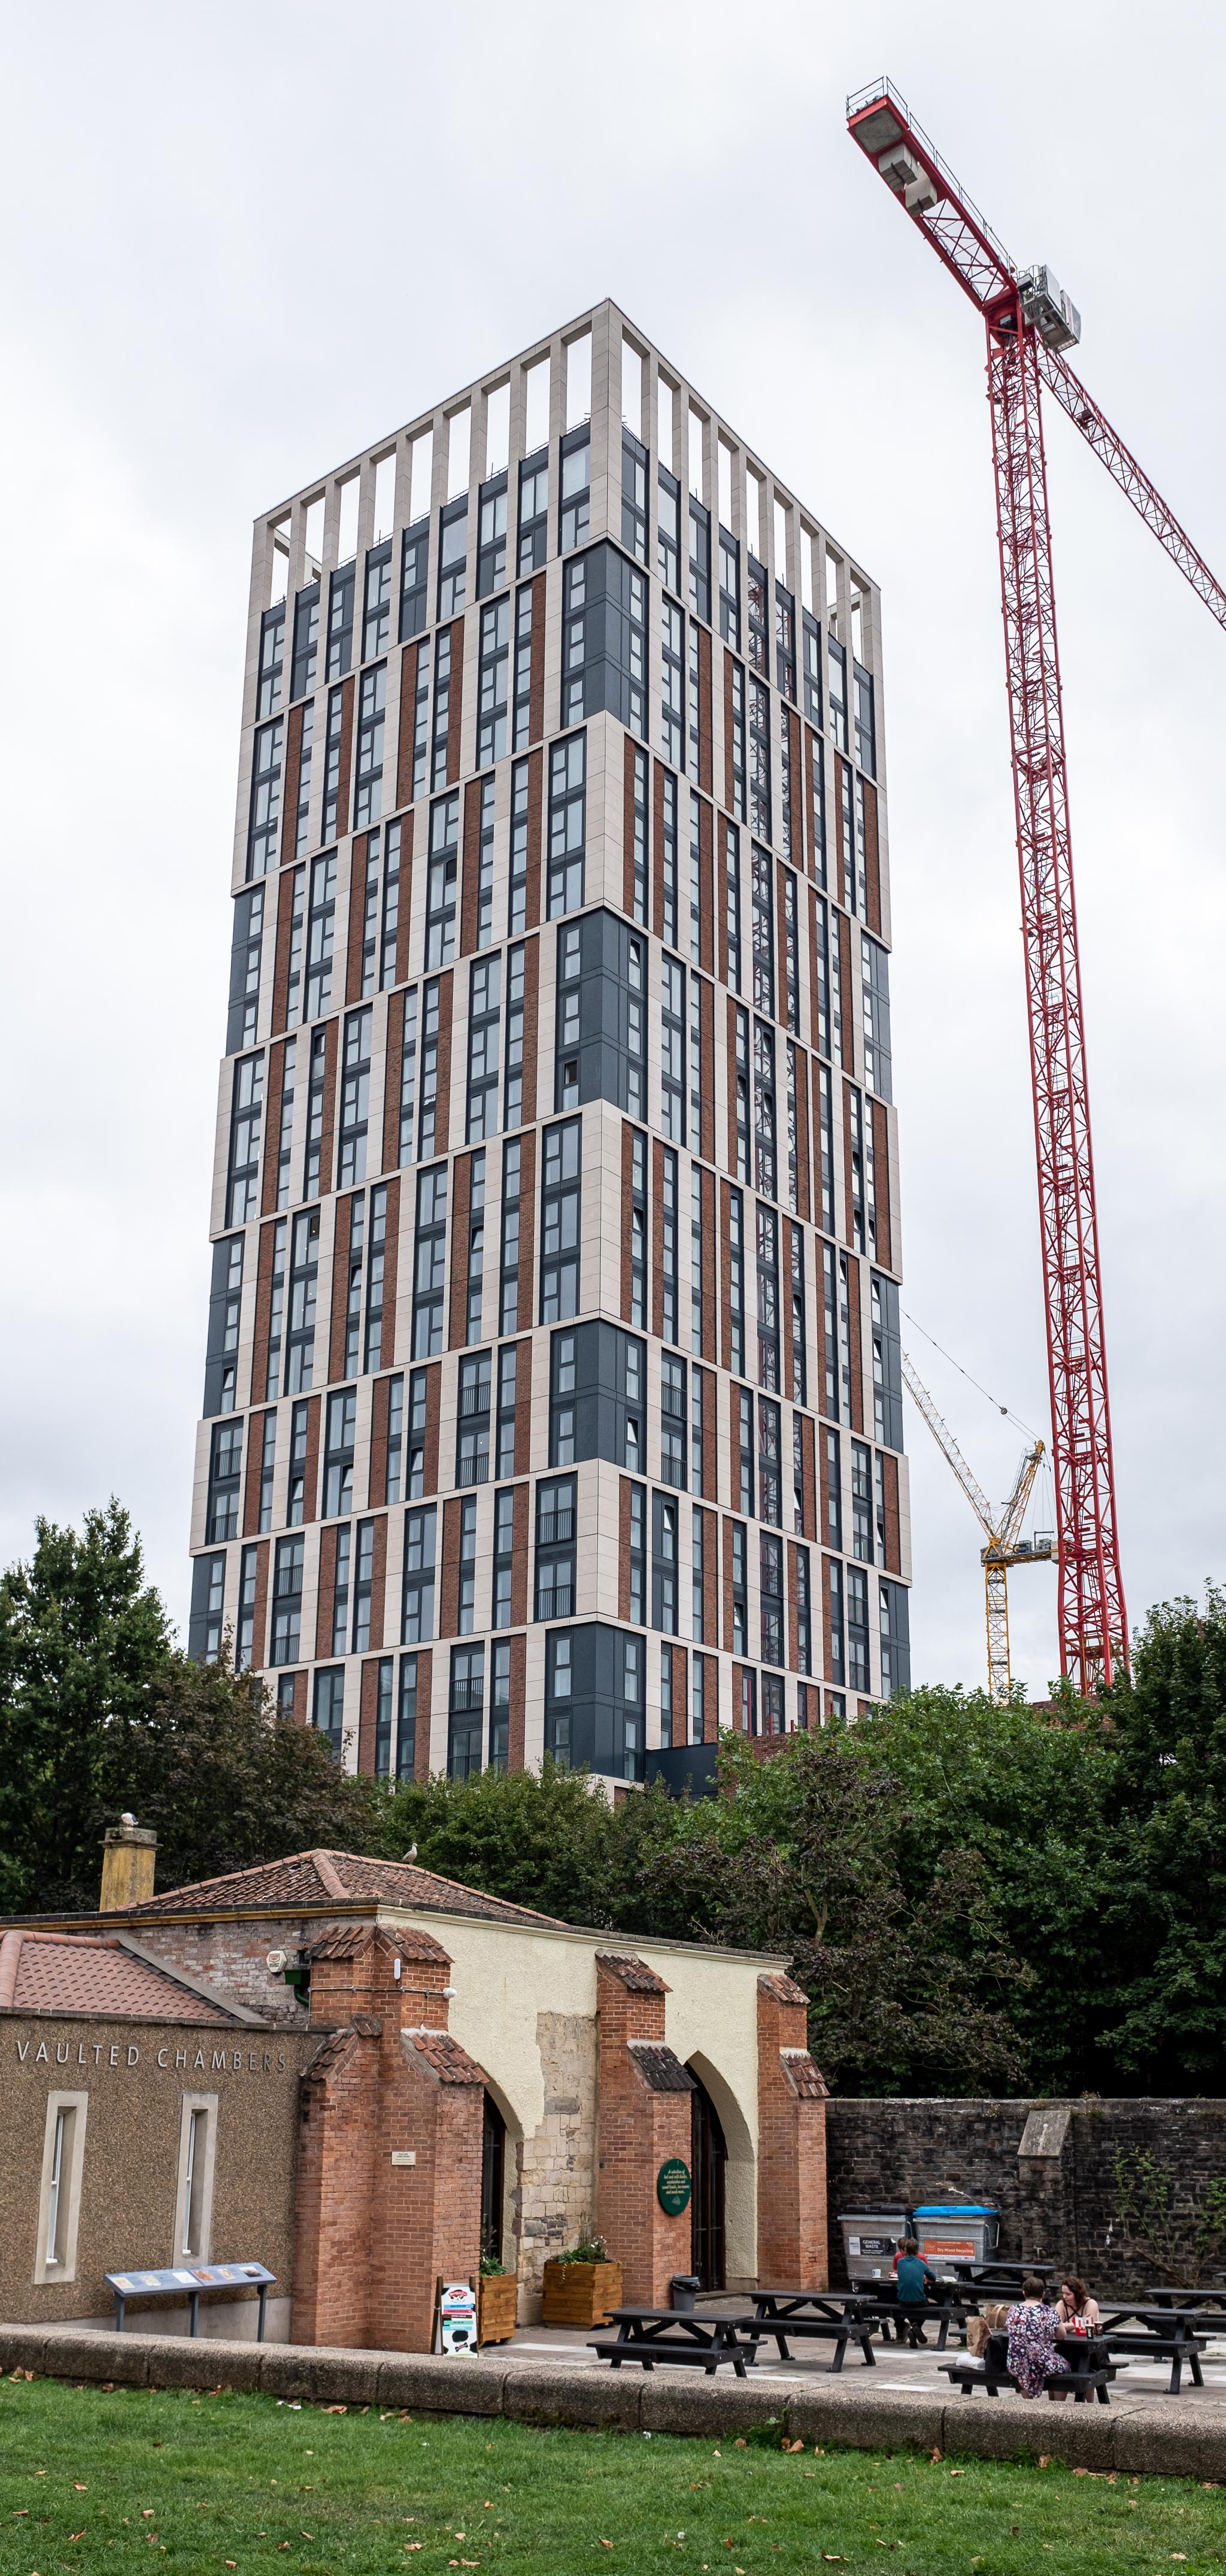 Castle Park View
And towering over one of Bristol's oldest buildings, here's one of Bristol's newest, Castle Park View. Its 26 storeys towering up at 98 metres, it'...